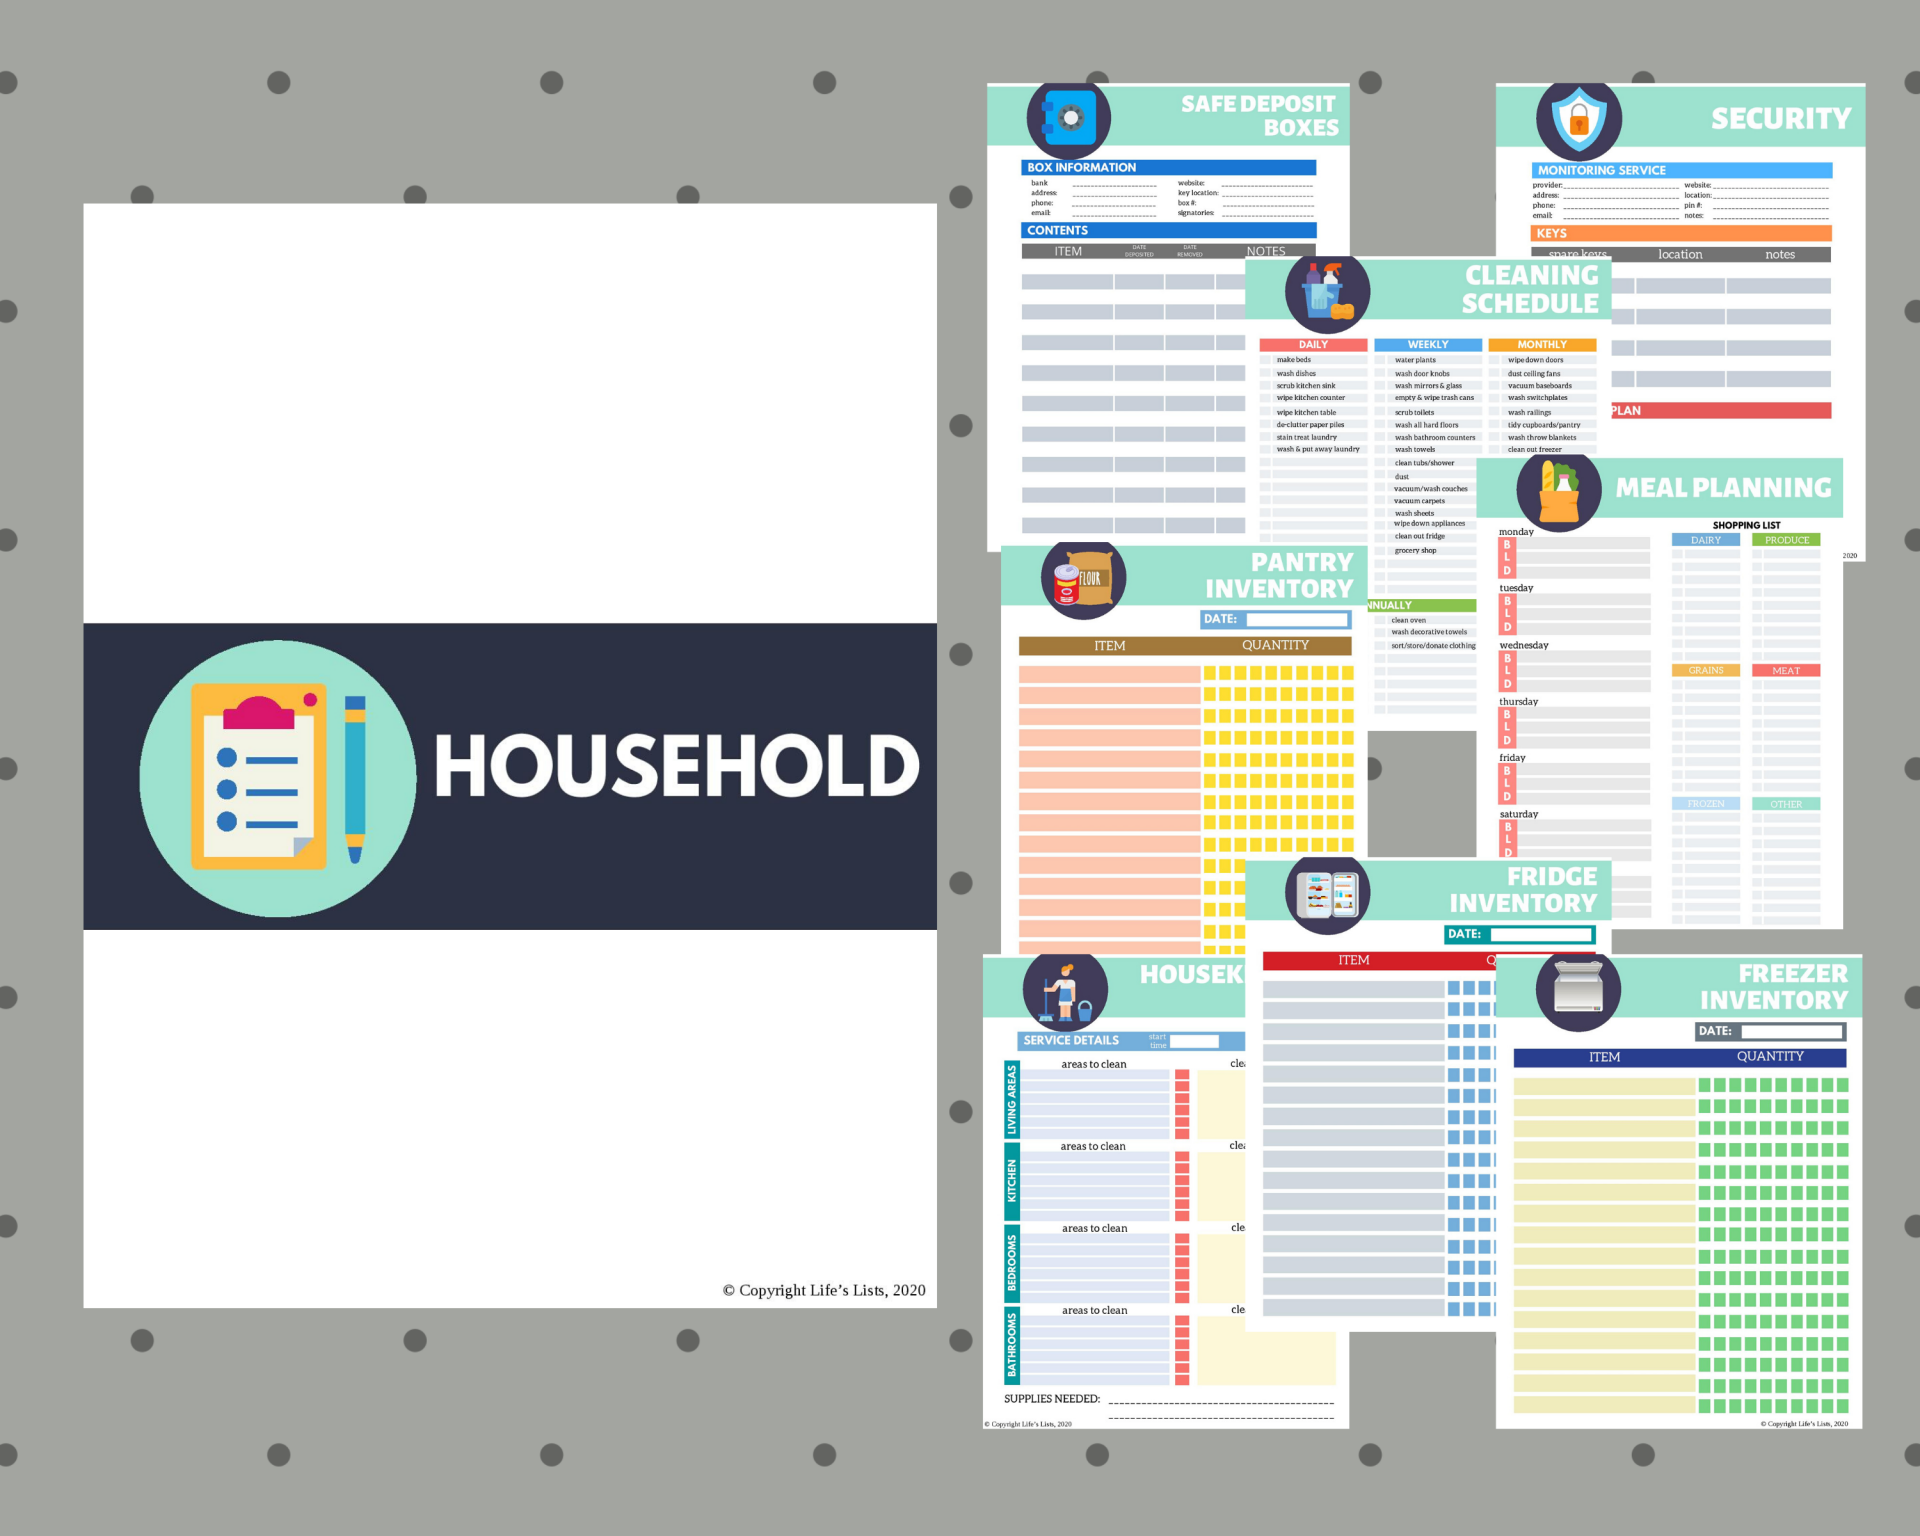 Organize Your Important Household Information with A Life Binder